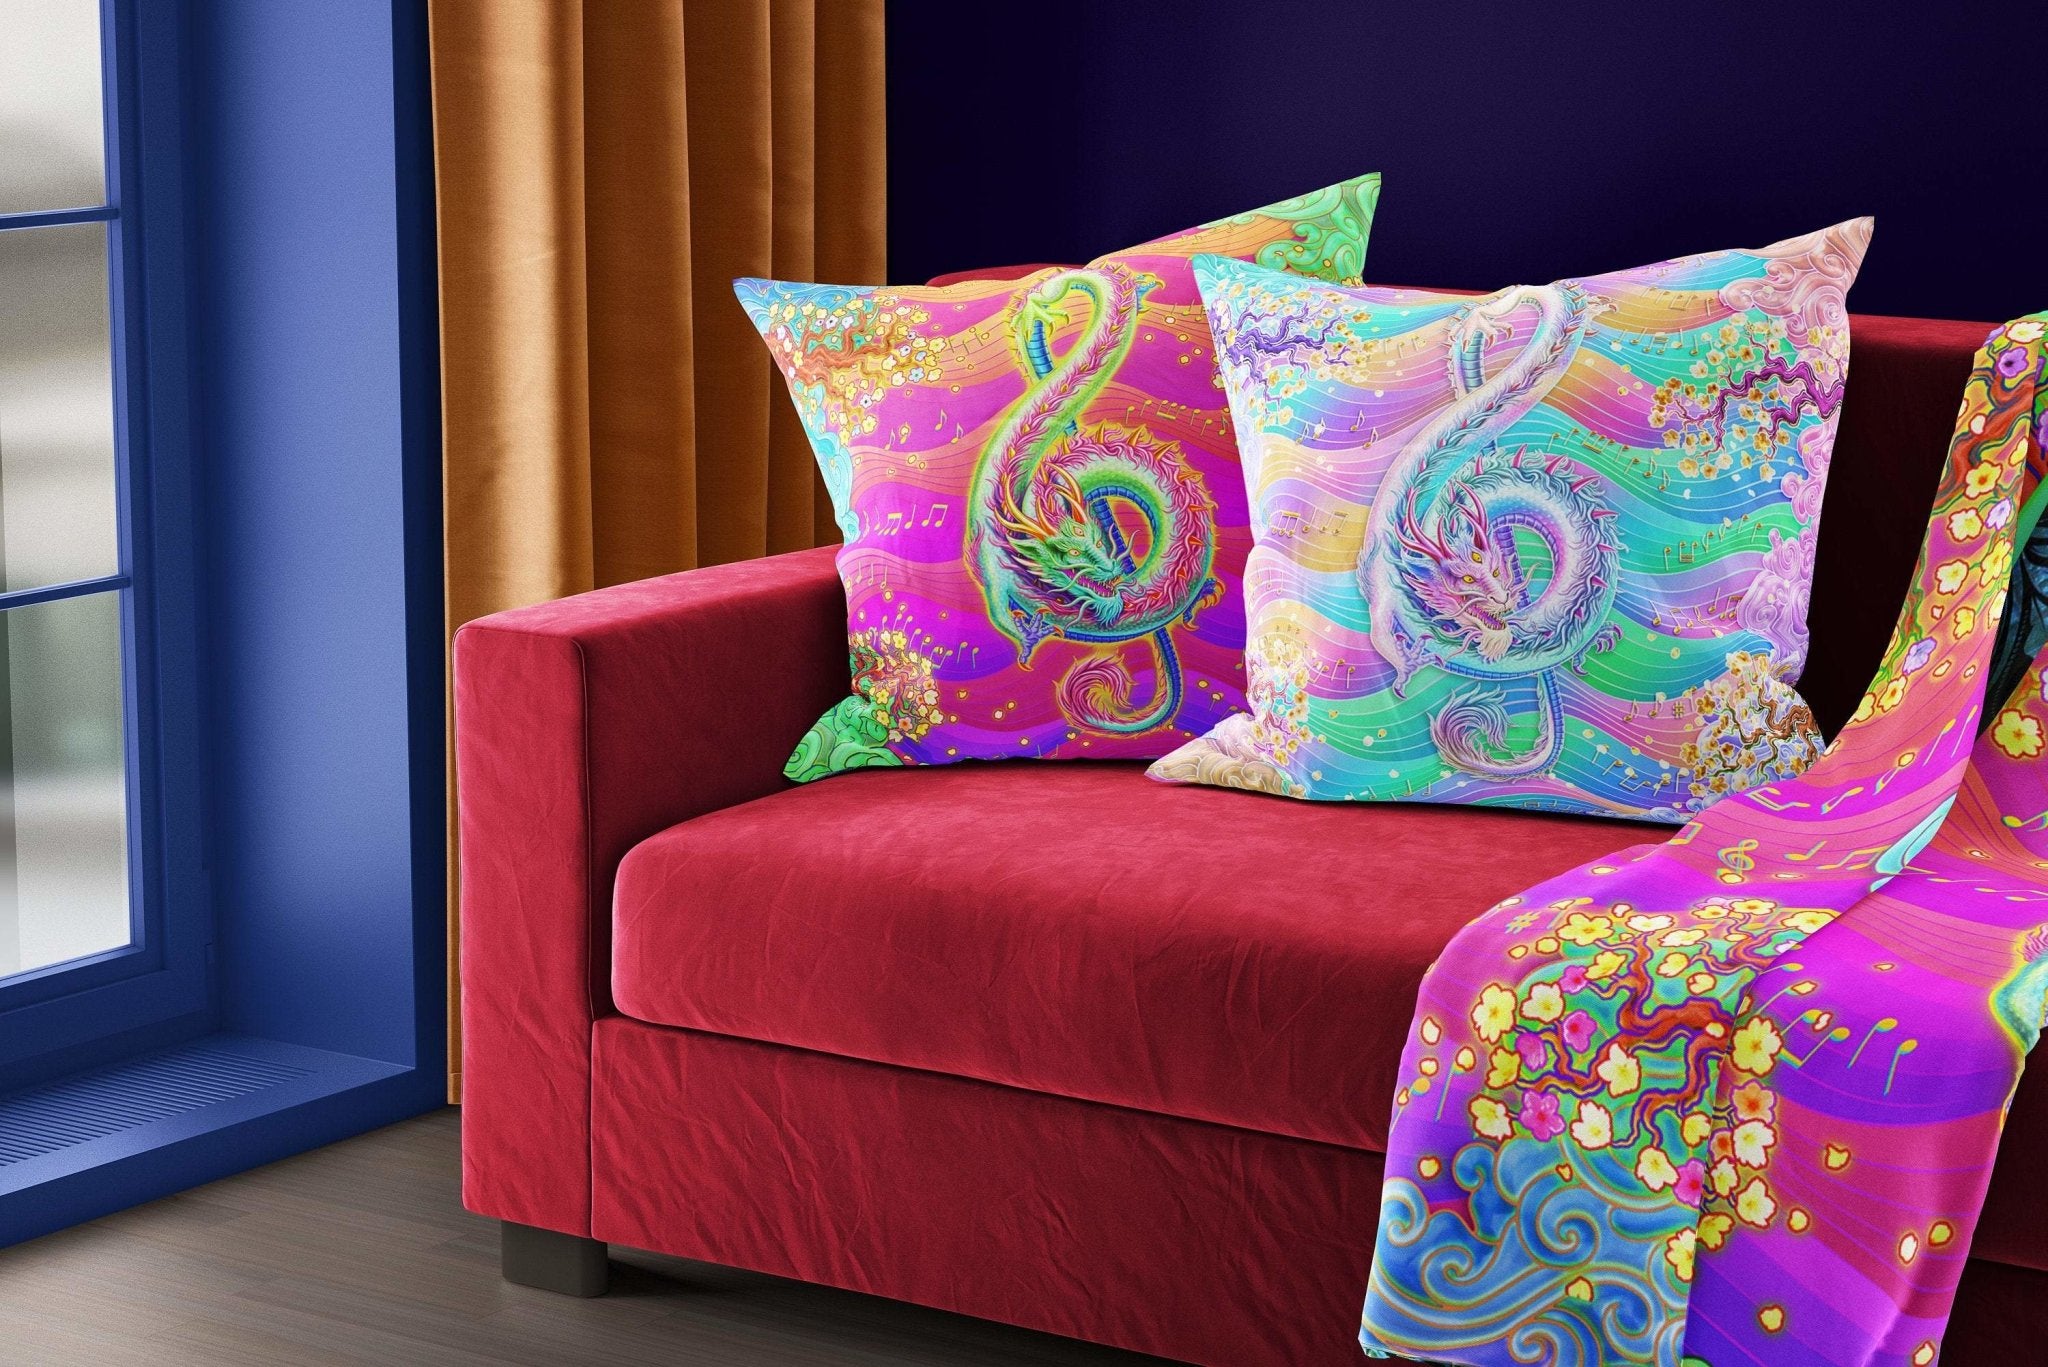 Psychedelic Throw Pillow, Decorative Accent Cushion, Eclectic Home Decor, Music Room, Kidcore - Treble Clef, Psy Neon Dragon - Abysm Internal